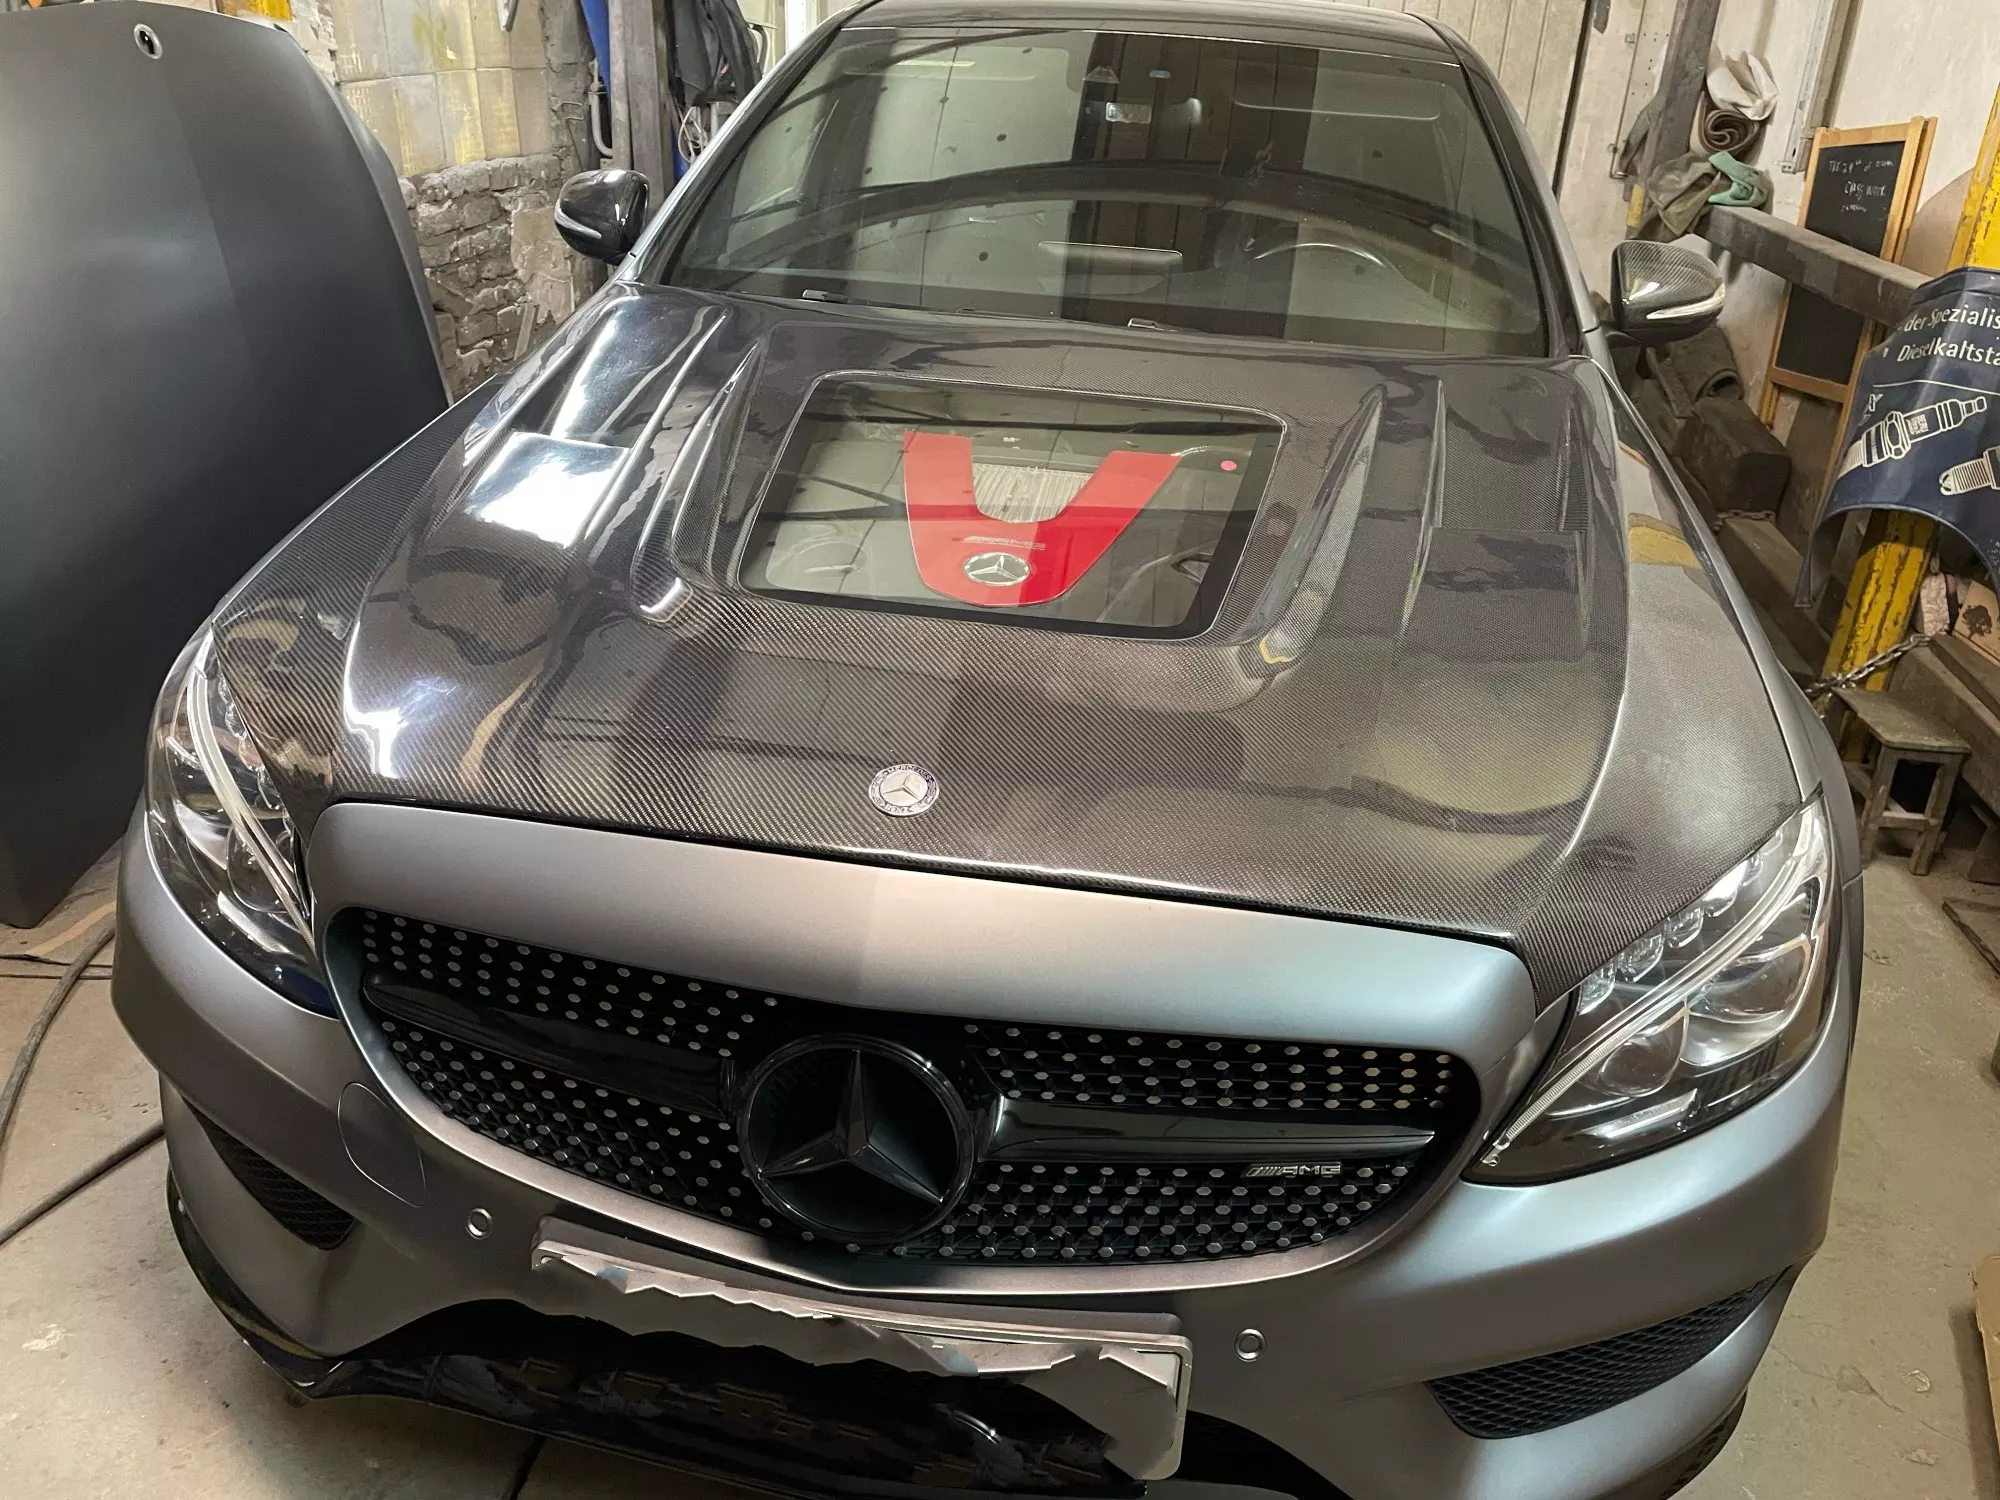 Mercedes C Class W205 Saloon Full Carbon Fibre Hood/Bonnet Replacement For the C43/C63 and AMG Line Models between 2015-2018 - Designed to show off that gorgeous engine bay in the C43/C63 Models and goes perfectly with Carbon Fibre Engine covers. The Perspex Centre Window creates the look of aggression when coupled with the more aggressive style of this Carbon Fibre Bonnet/Hood Replacement. 